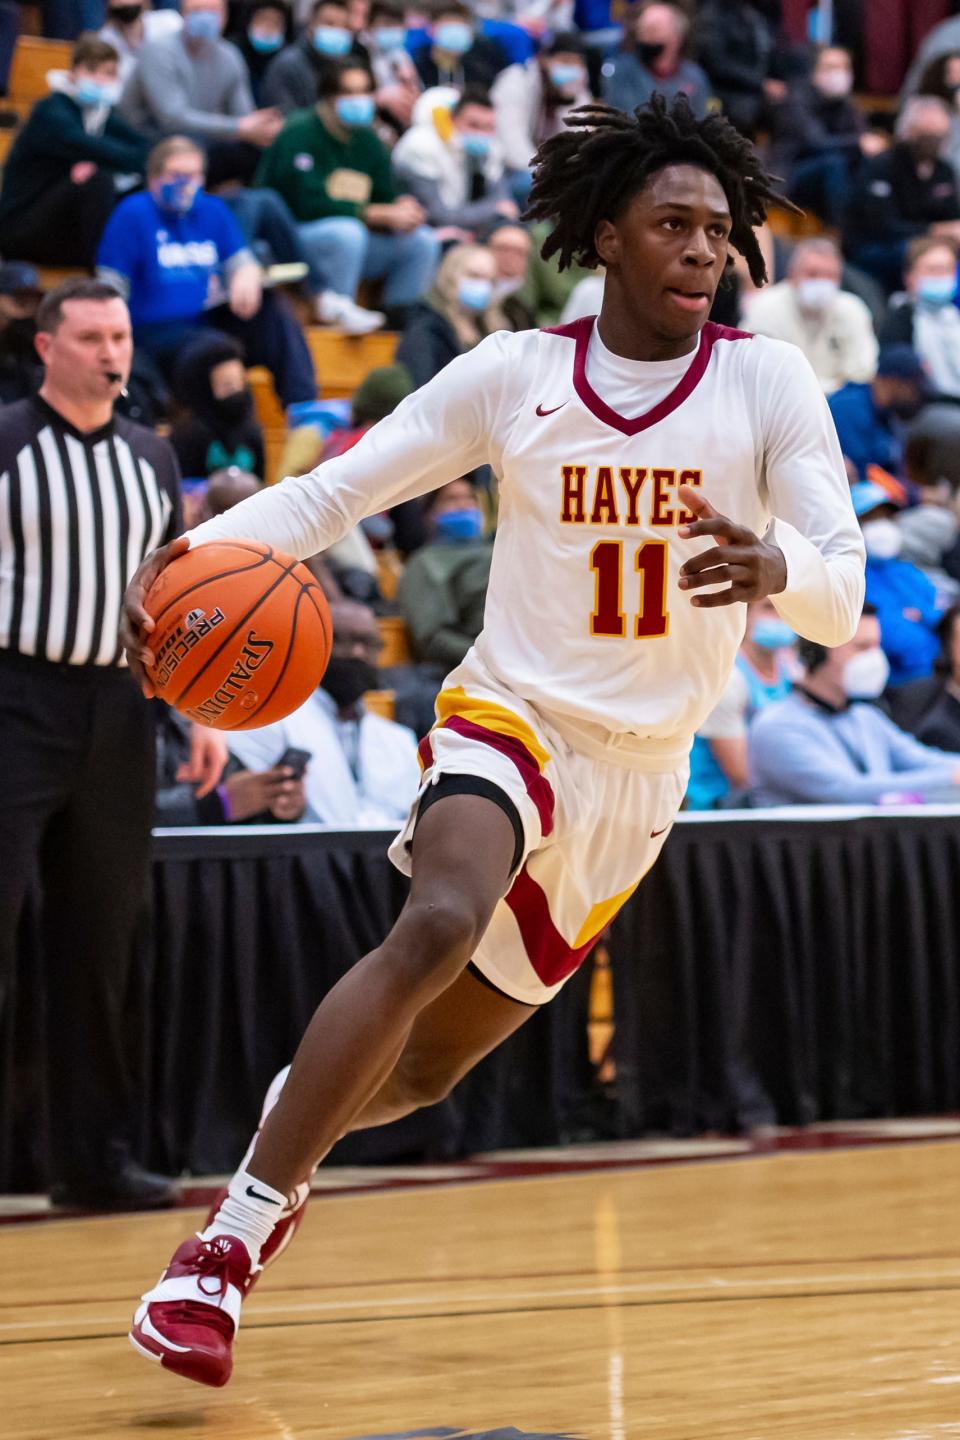 Ian Jackson averaged 19.8 points, five rebounds and four assists for Cardinal Hayes High School and won the MaxPreps National Sophomore of the Year.